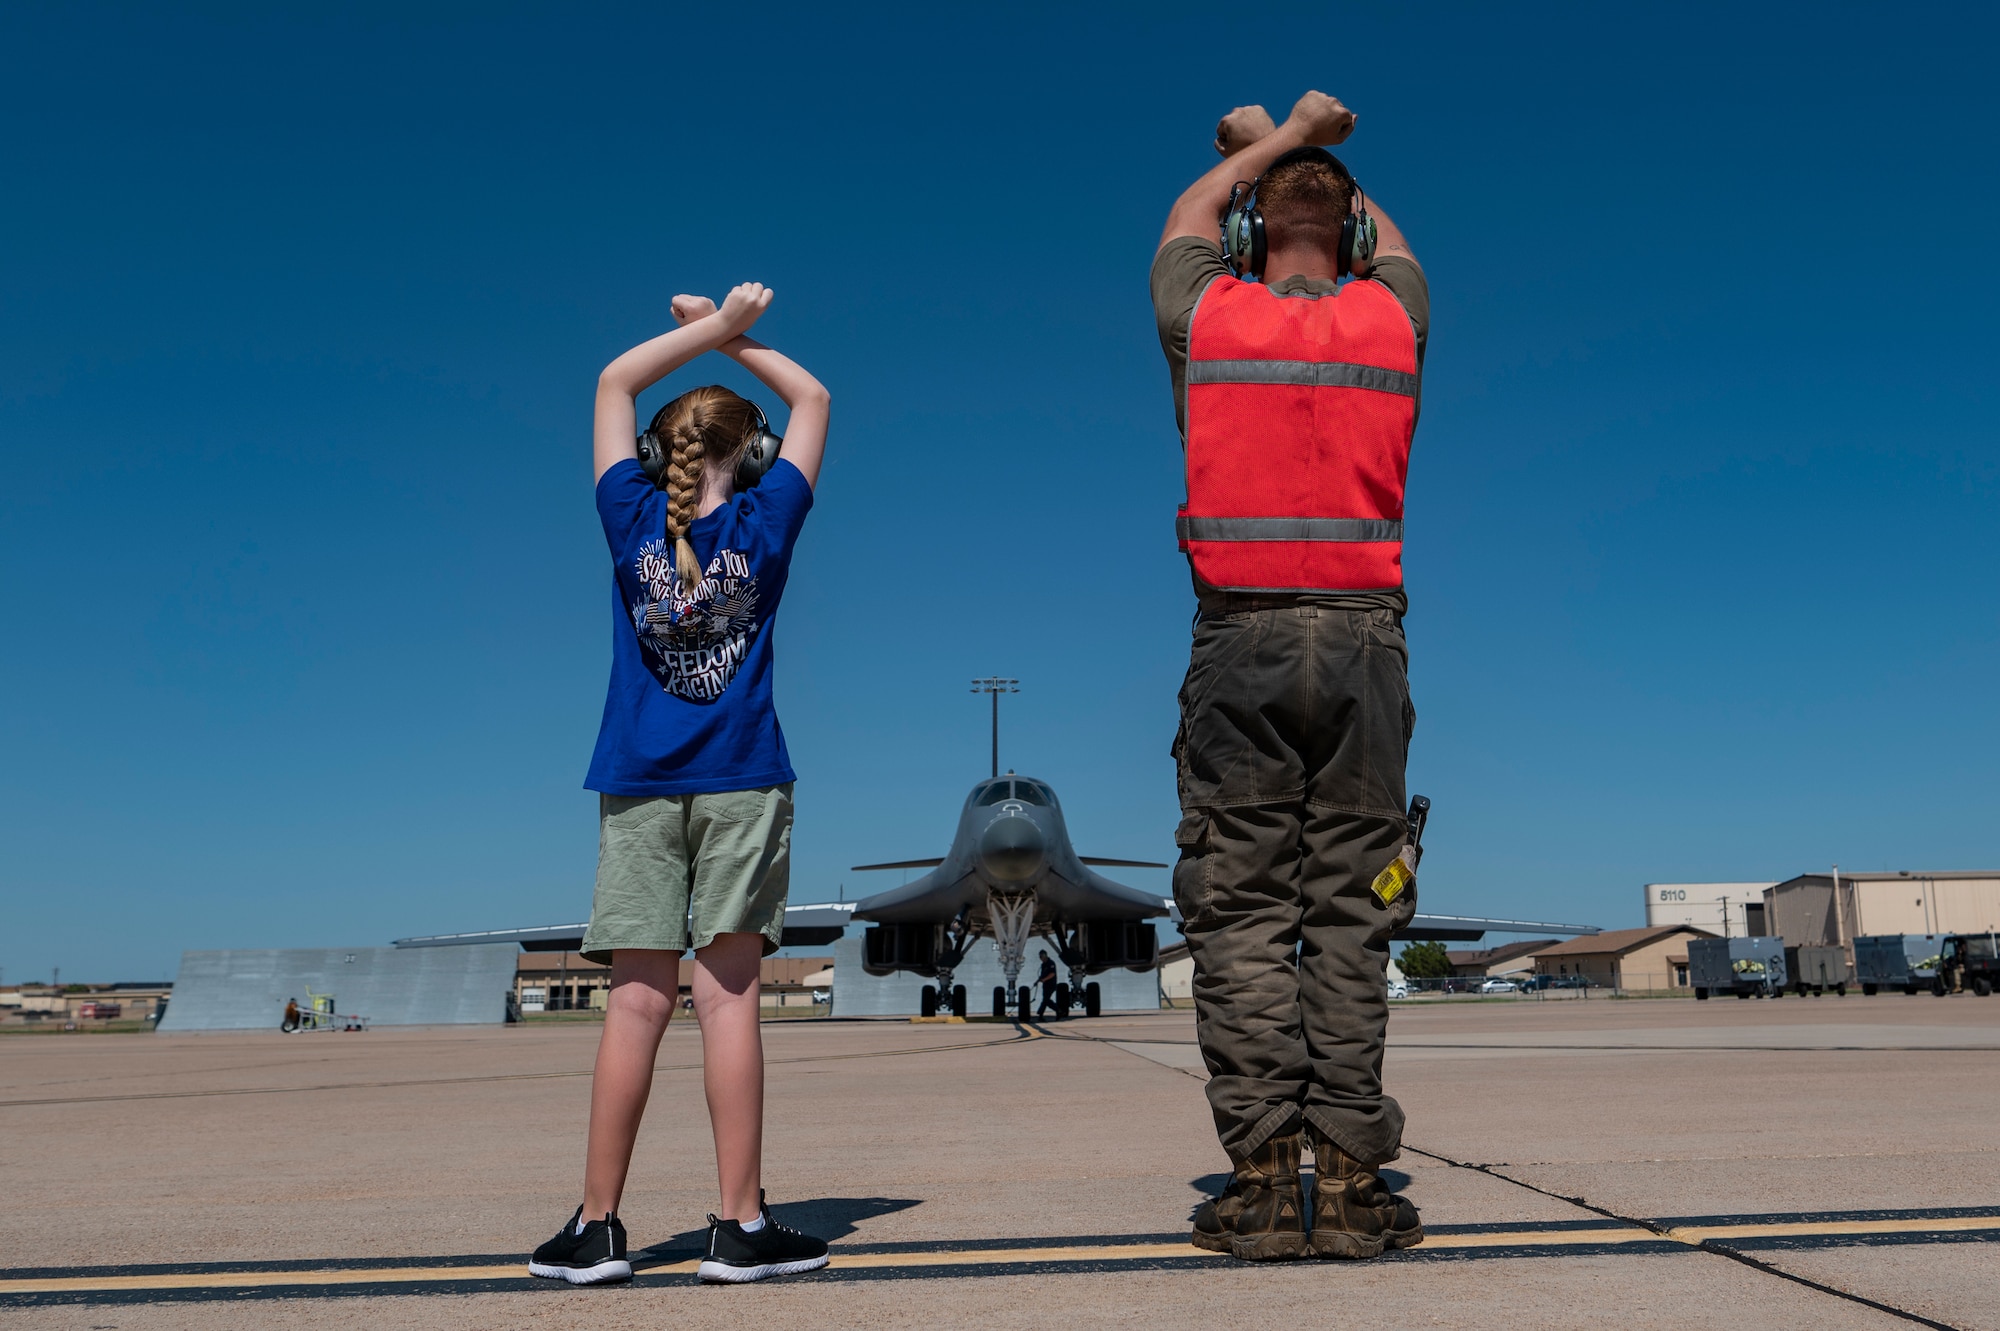 U.S. Air Force Staff Sgt. Zachary Gabriel, 337th Test and Evaluation Squadron crew chief, and Jennifer Kippie, daughter of Col. Kevin Kippie, 7th Bomb Wing vice commander, signals a B-1B Lancer to stop at Dyess Air Force Base, Texas, June 29, 2023. Kippie served at Dyess from June 11, 2021, to June 16, 2023. While at Dyess, Kippie was committed to excellence as he fostered financial innovation and proposals for the installation, created a Wing Welcome Center for new Airmen and worked in integrated teams to action the wing’s fiscal efforts. (U.S. Air Force photo by Senior Airman Ryan Hayman)